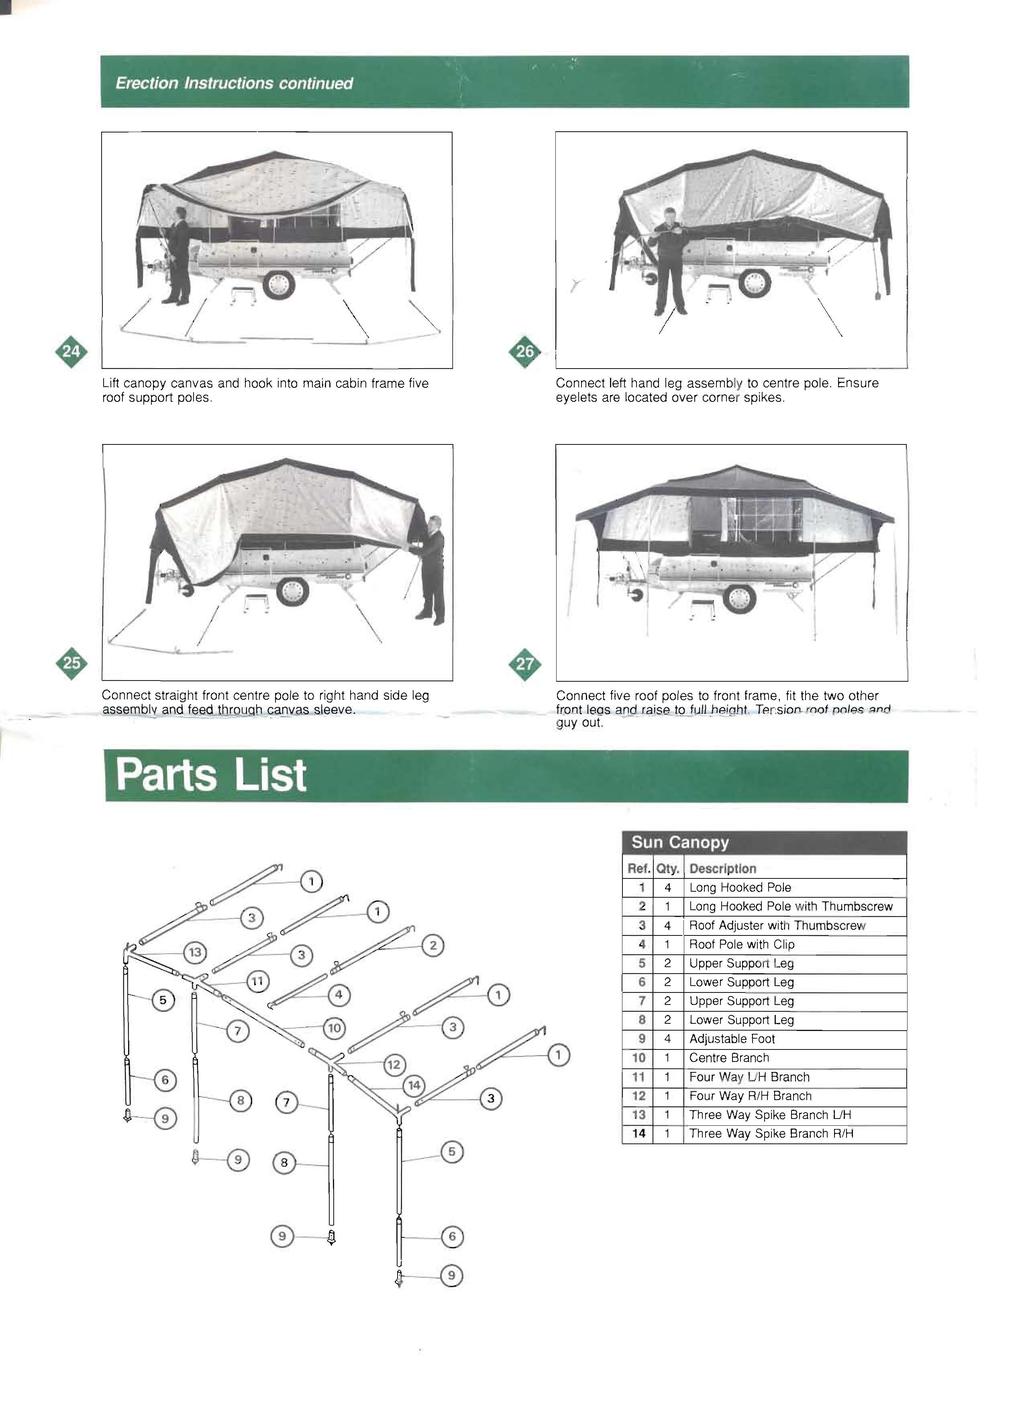 ,.'. Erection Instructions continued / / /---L-.:: - -_ --..,.; \ Lift canopy canvas and hook into main cabin frame five roof support poles. Connect left hand leg assembly to centre pole.